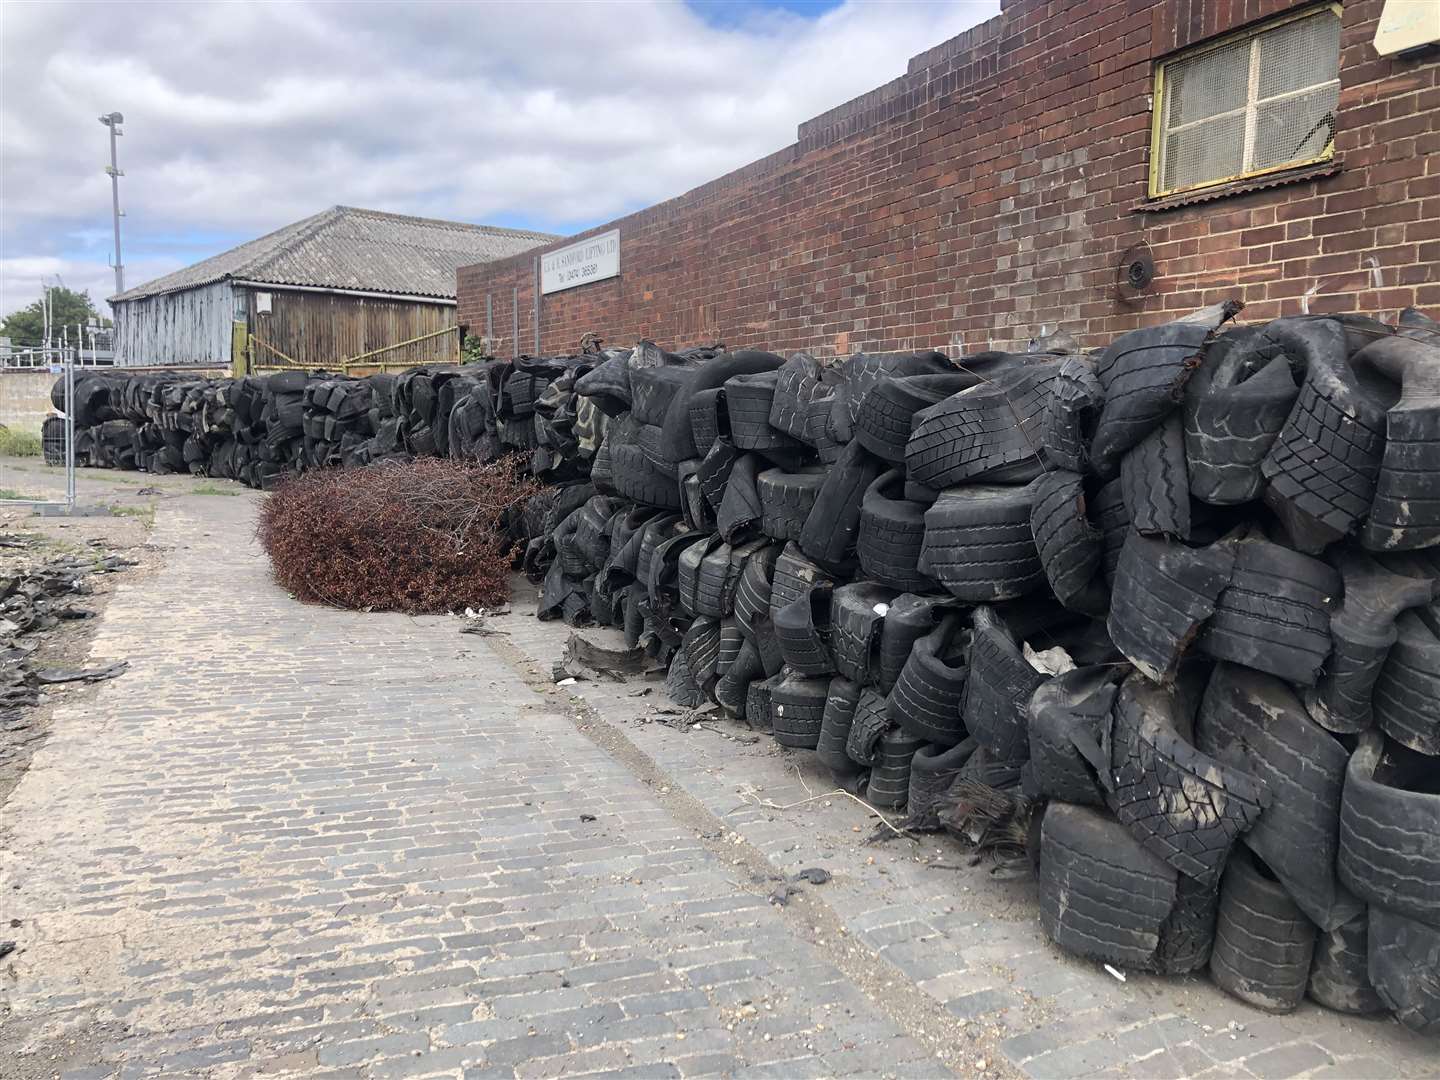 The wall of tyres at the Canal Basin has disappeared but the mountain remains. Picture from August